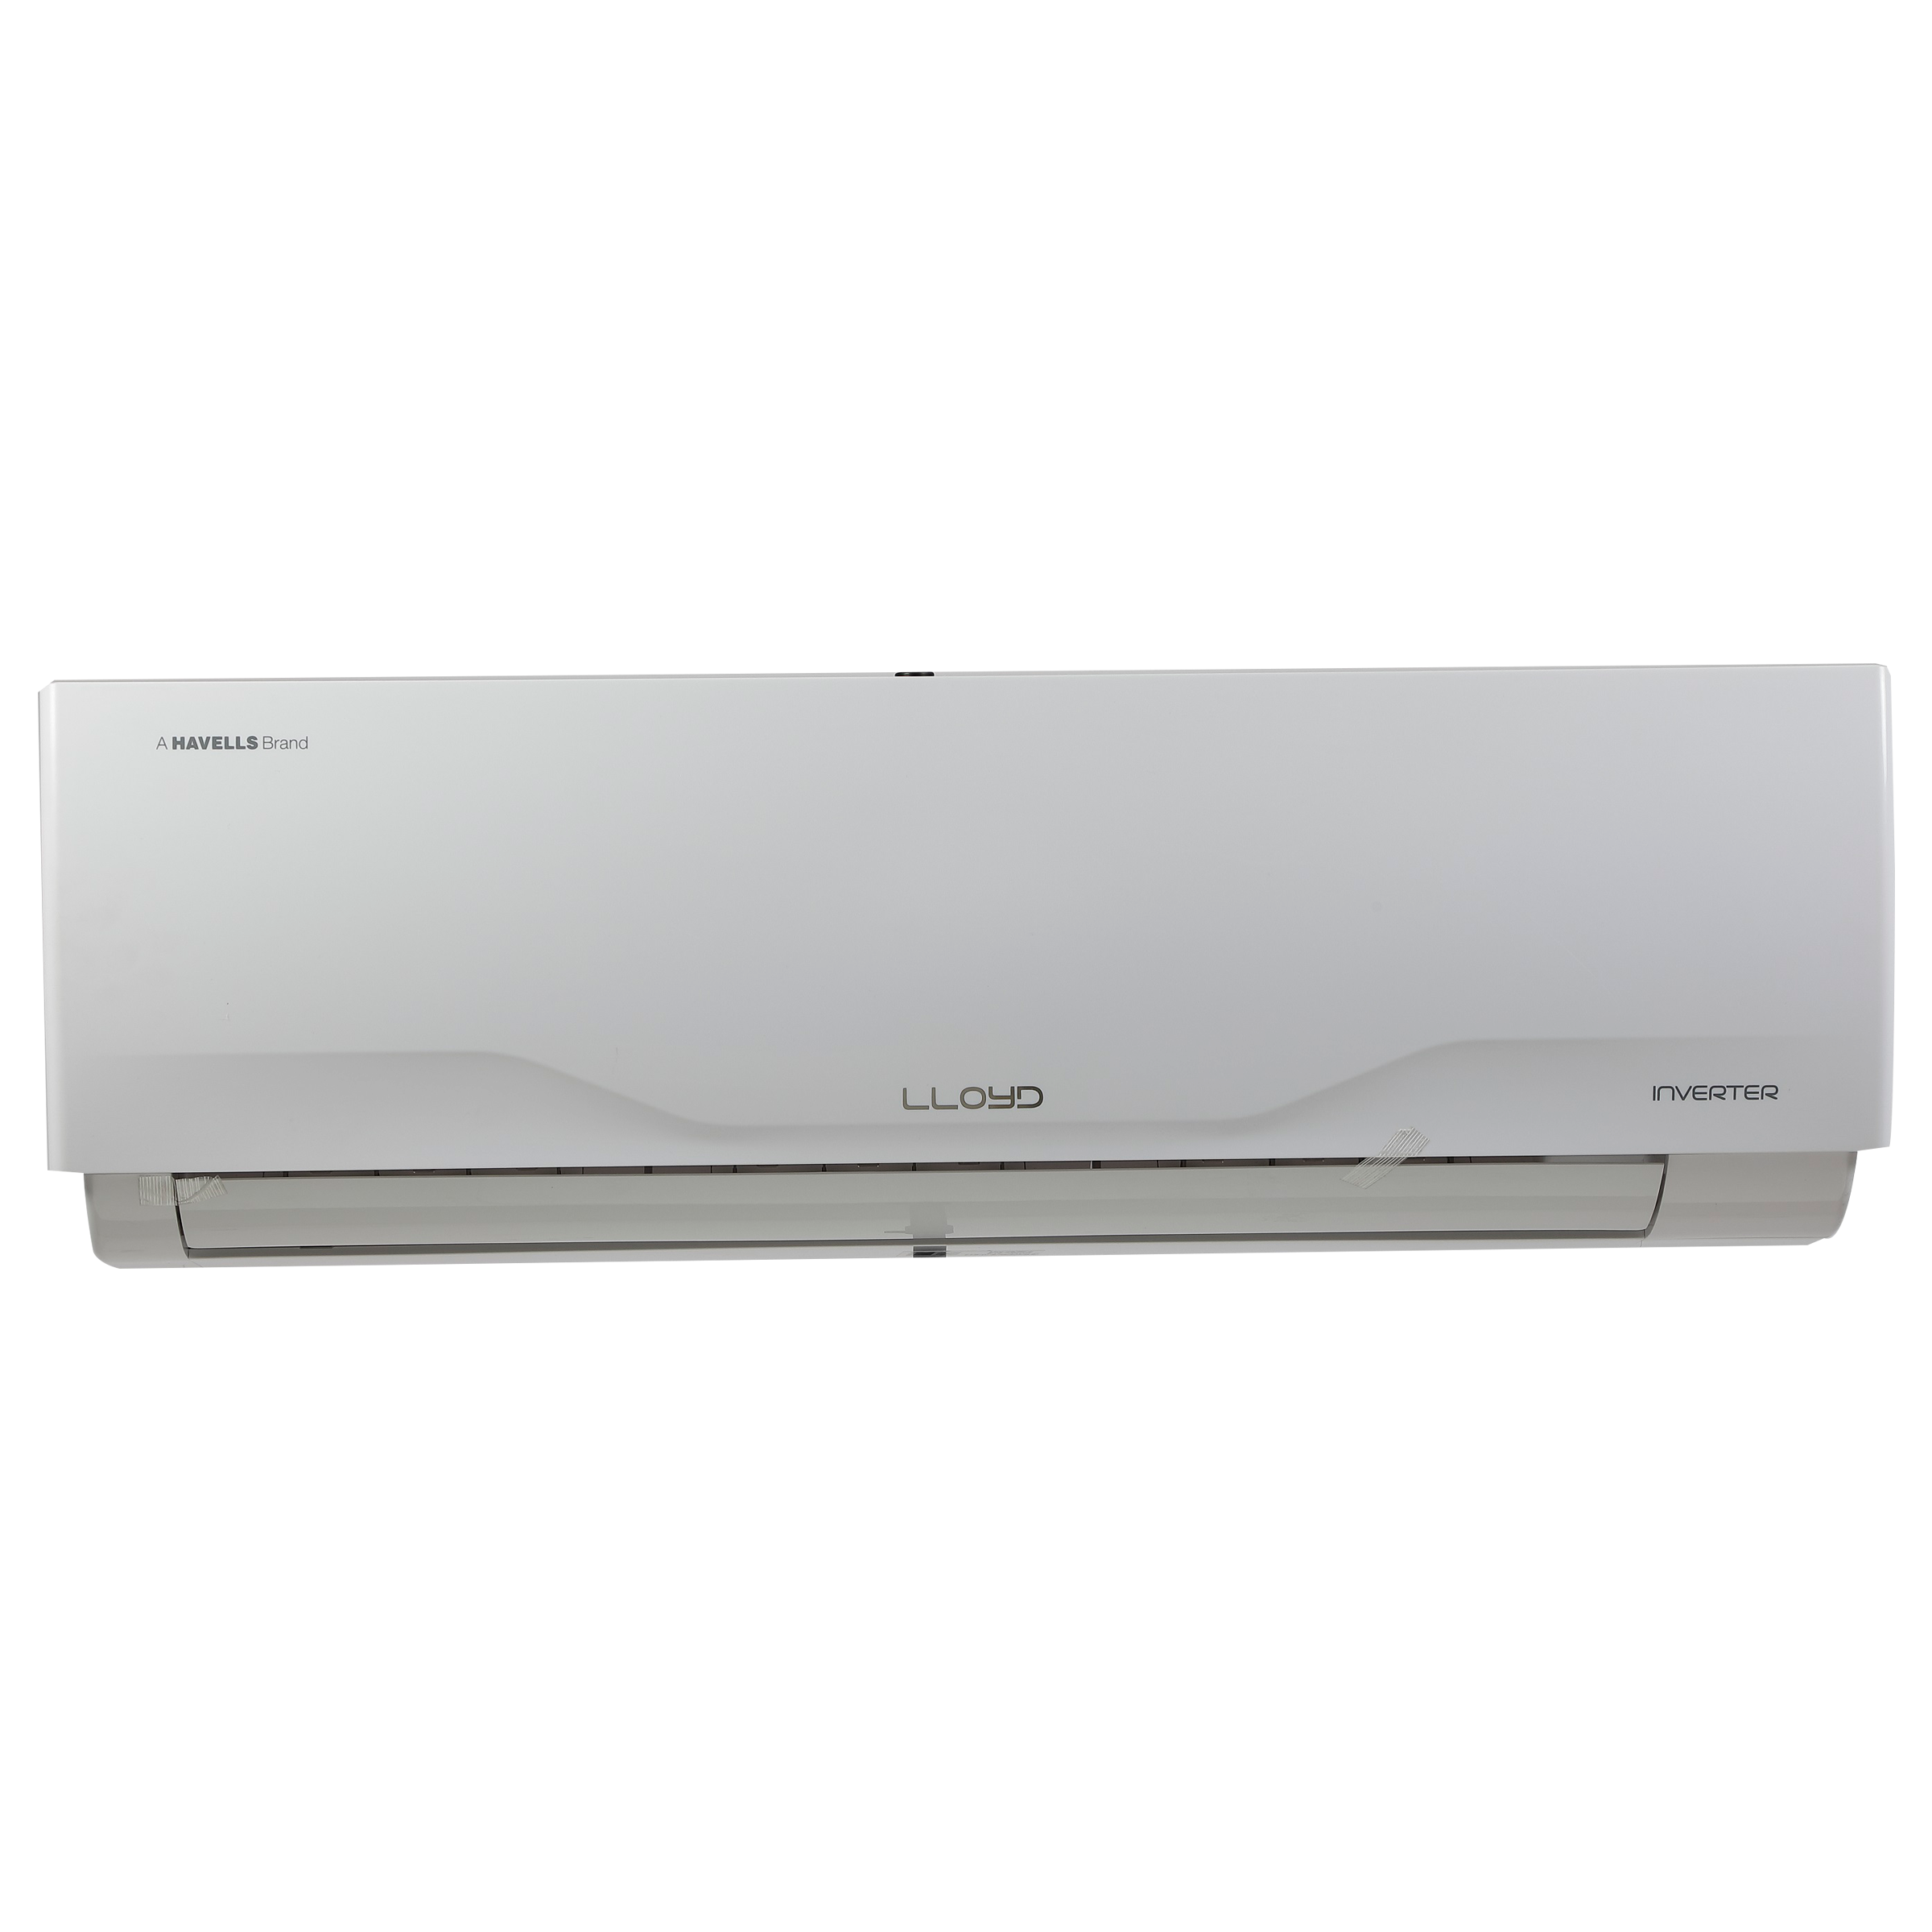 Lloyd 5 in 1 Convertible 1 Ton 4 Star Inverter Split AC with Low Gas Detection (2023 Model, Copper Condenser, GLS12I4FWCXV)_1